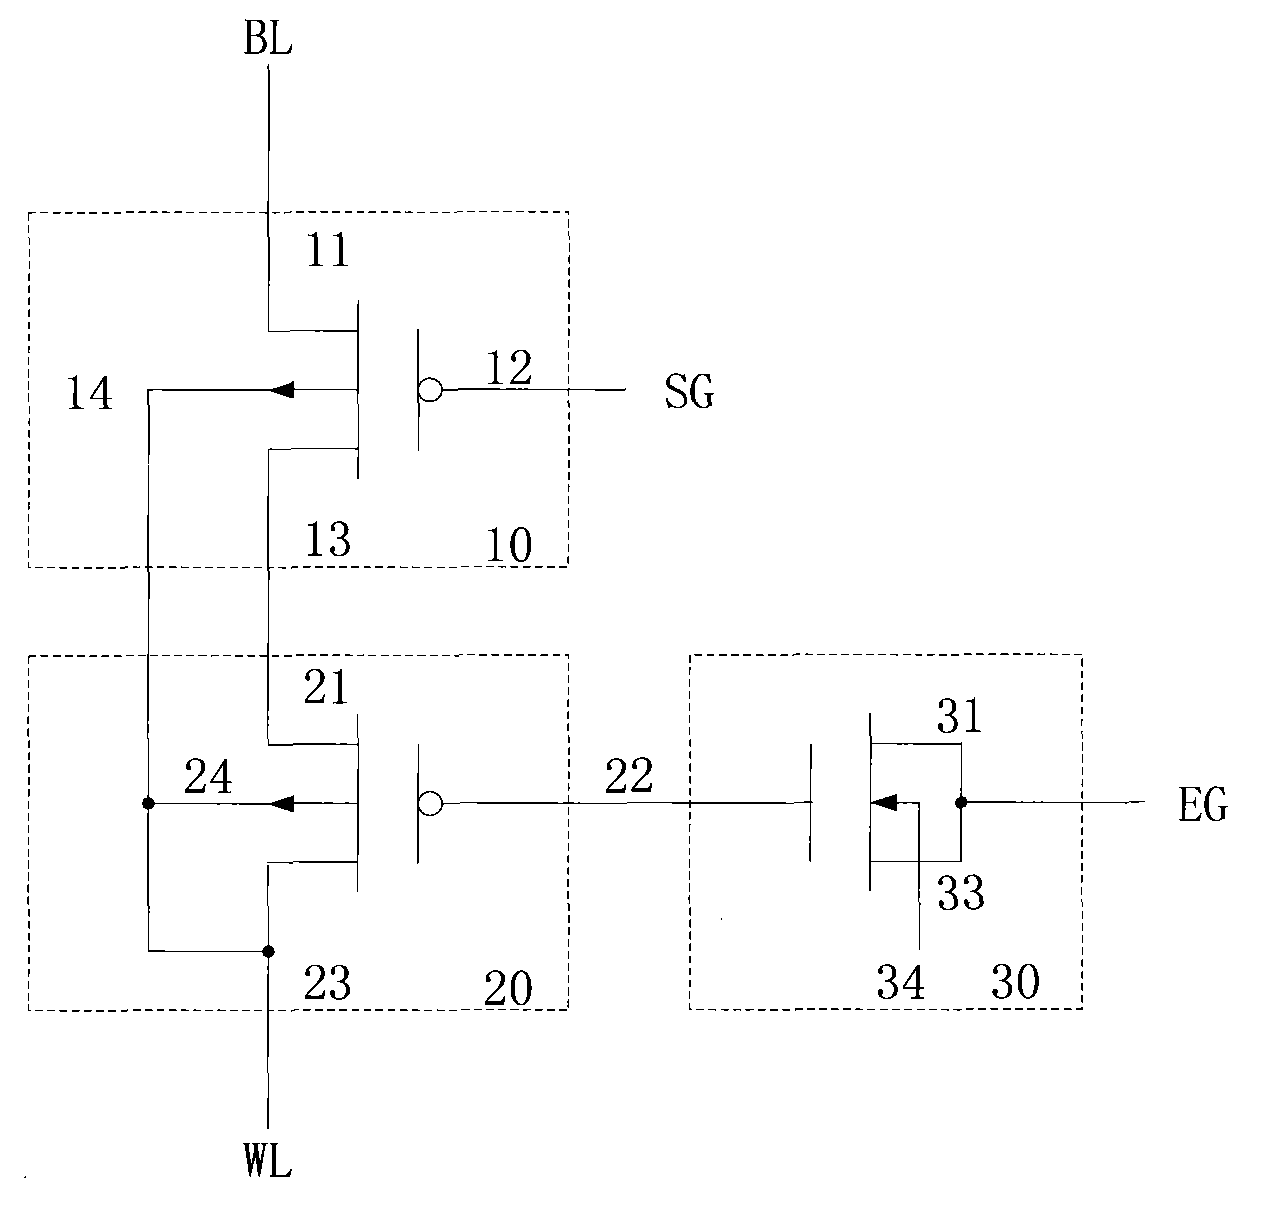 Unit structure of multi-time programmable (MTP) device